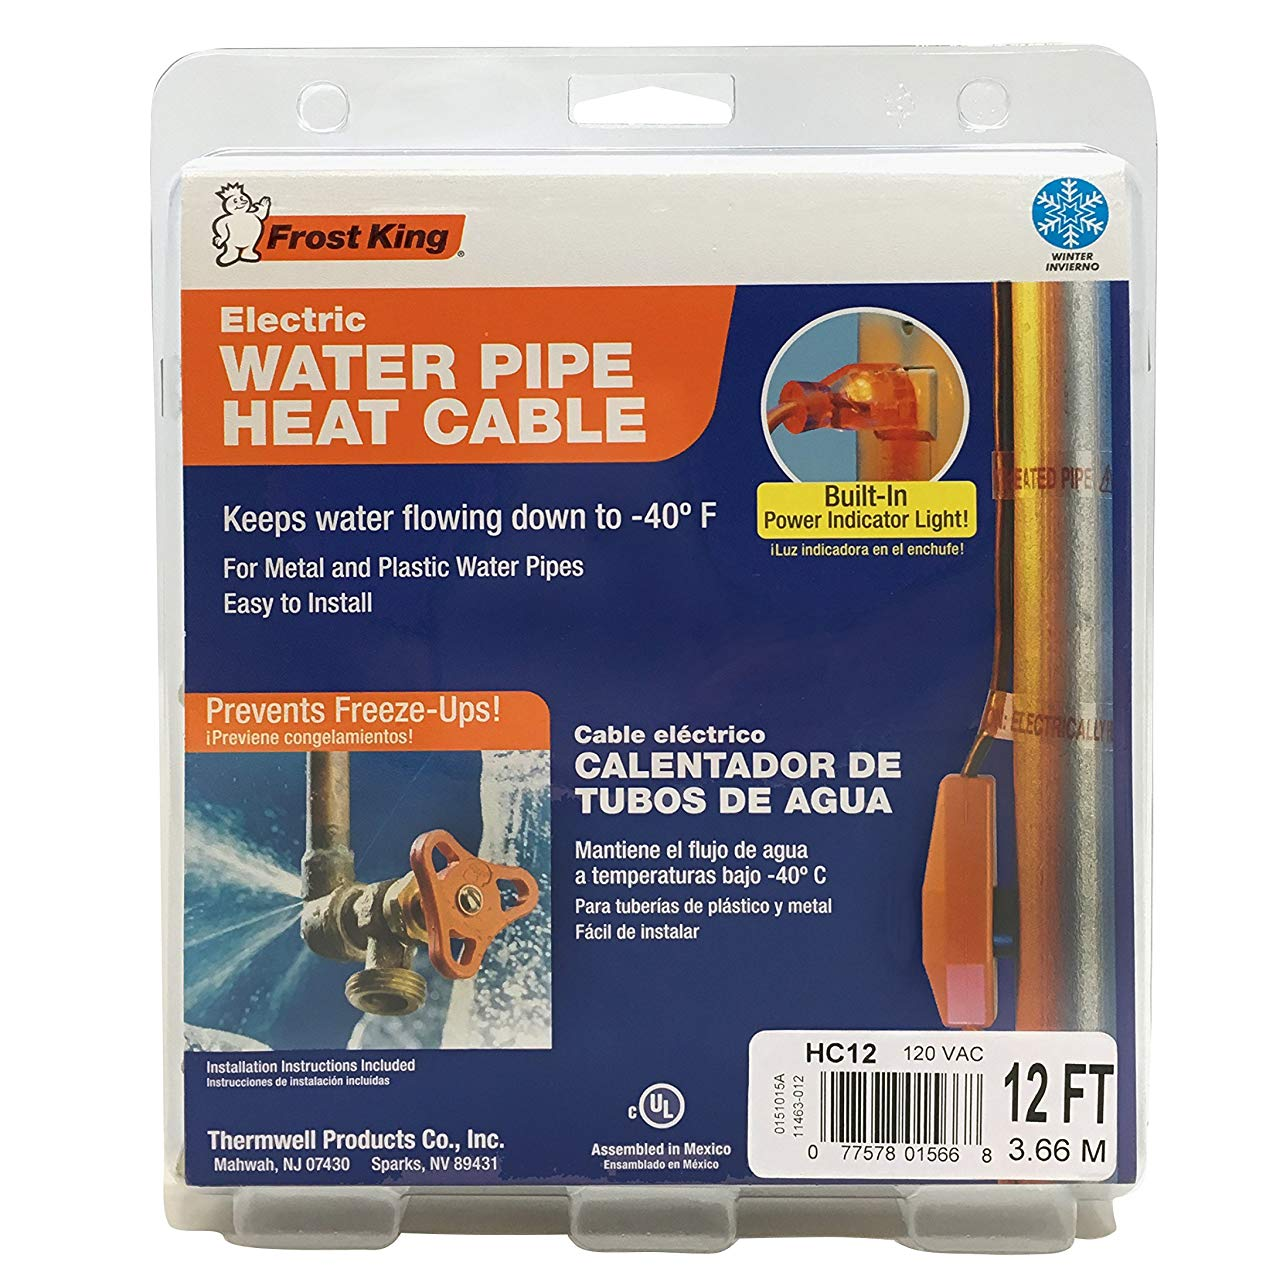 Frost King Heating Cables (12 Feet) Only $11.47!